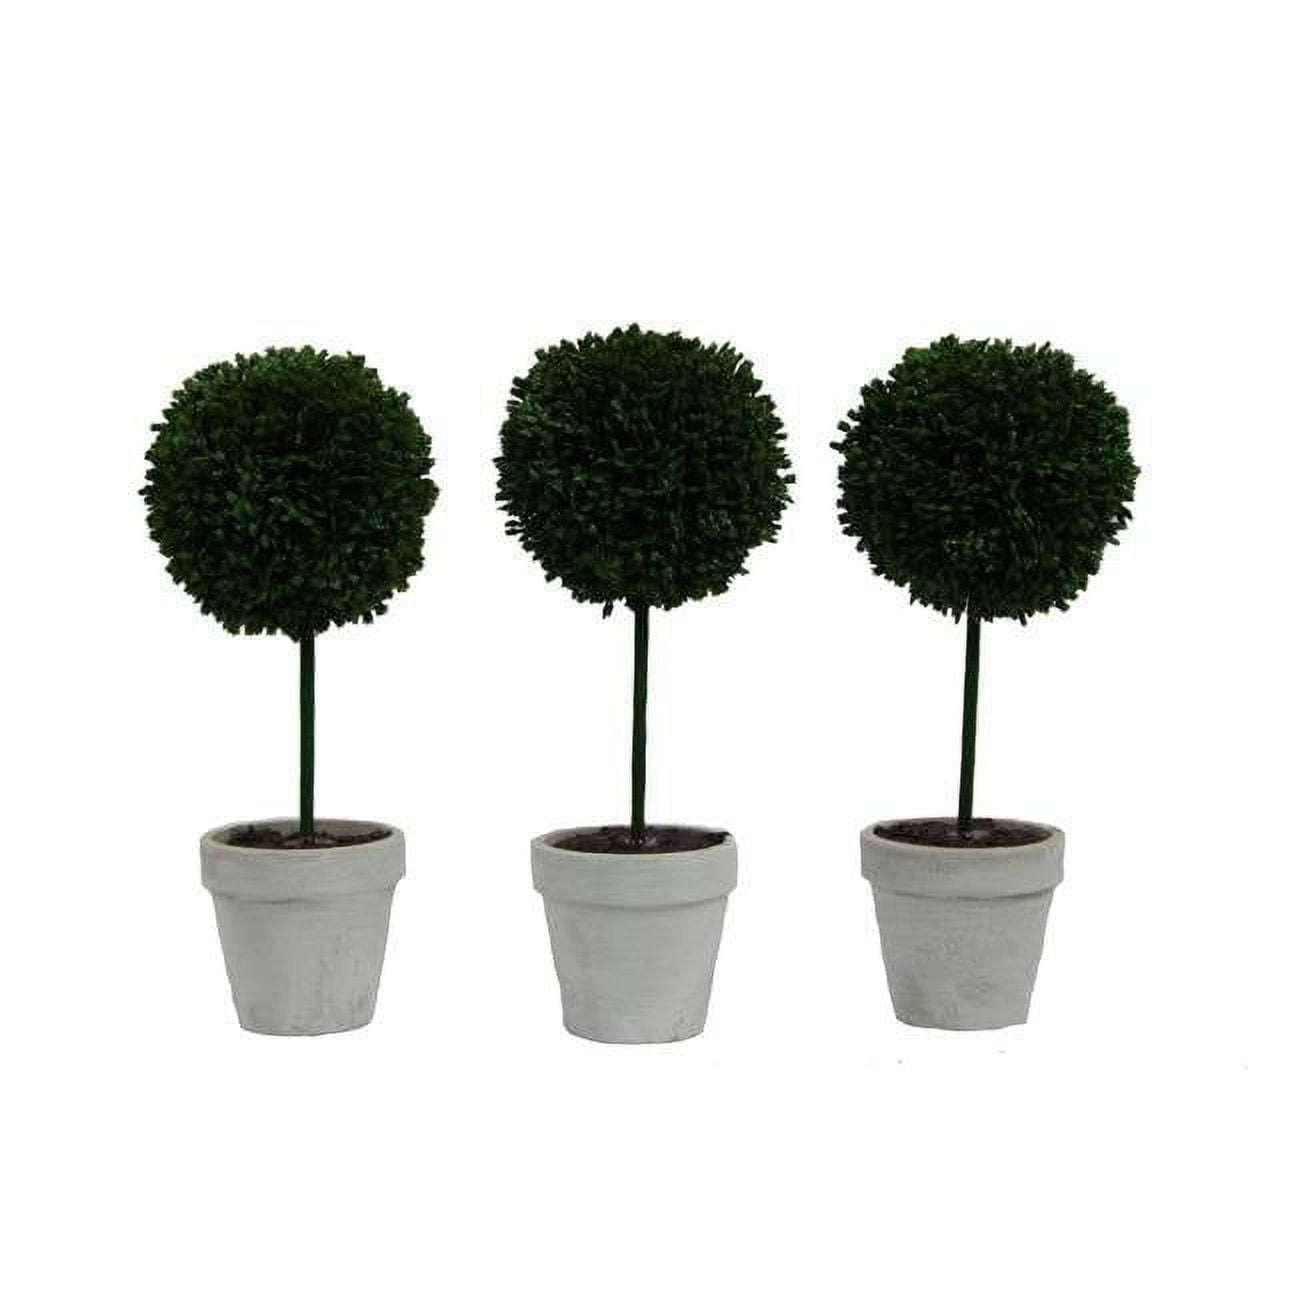 Picture of Admired By Nature ABN5P015-GRN 9 in. Artificial Boxwood Ball Topiary Plant Tabletop, Set of 3